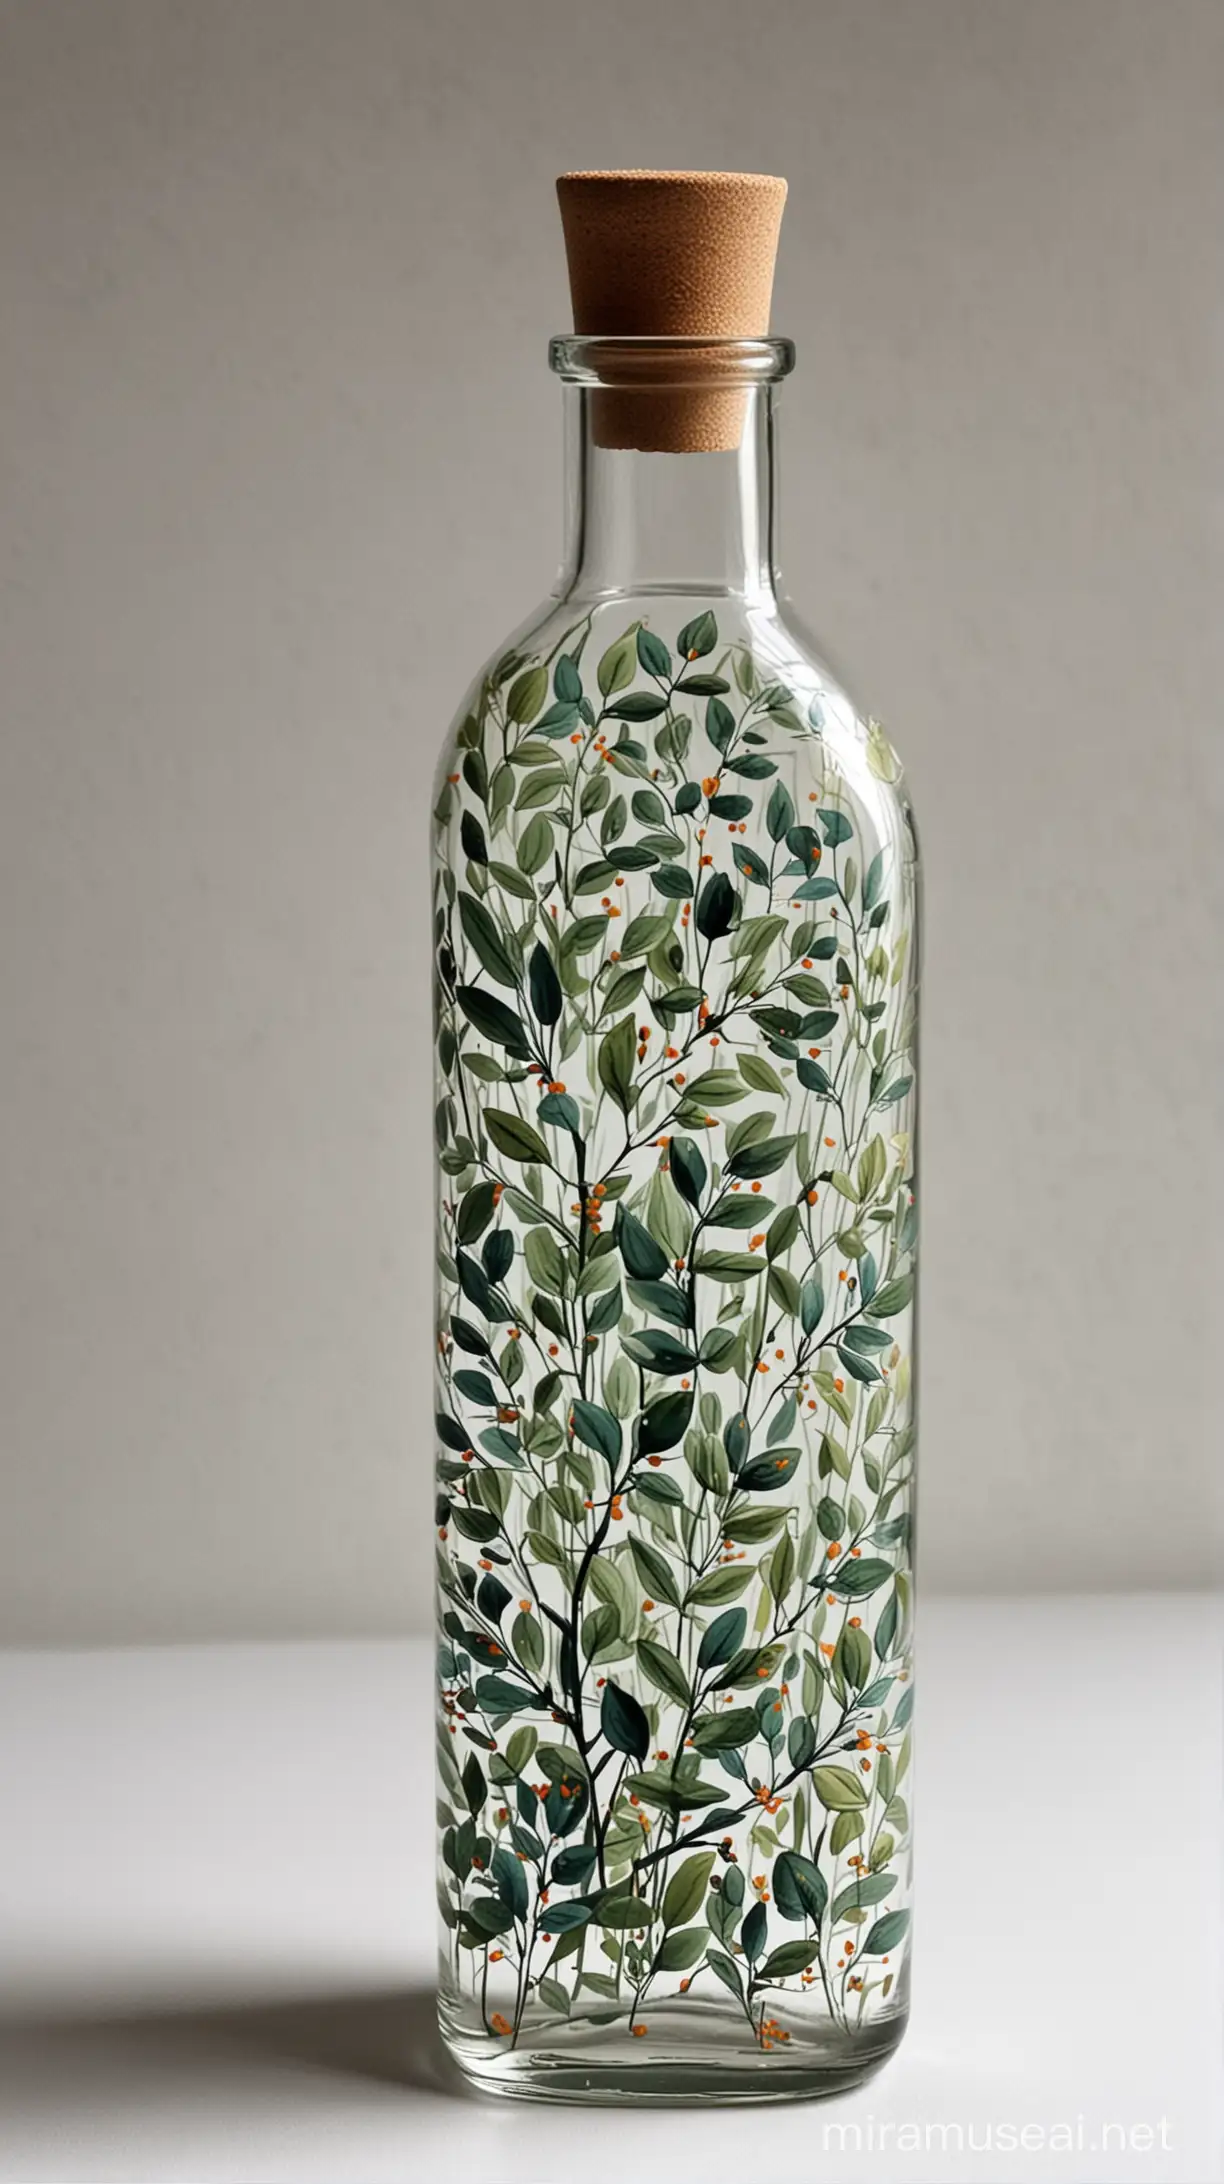 An aesthetically hand painted bottle art with small leaves 